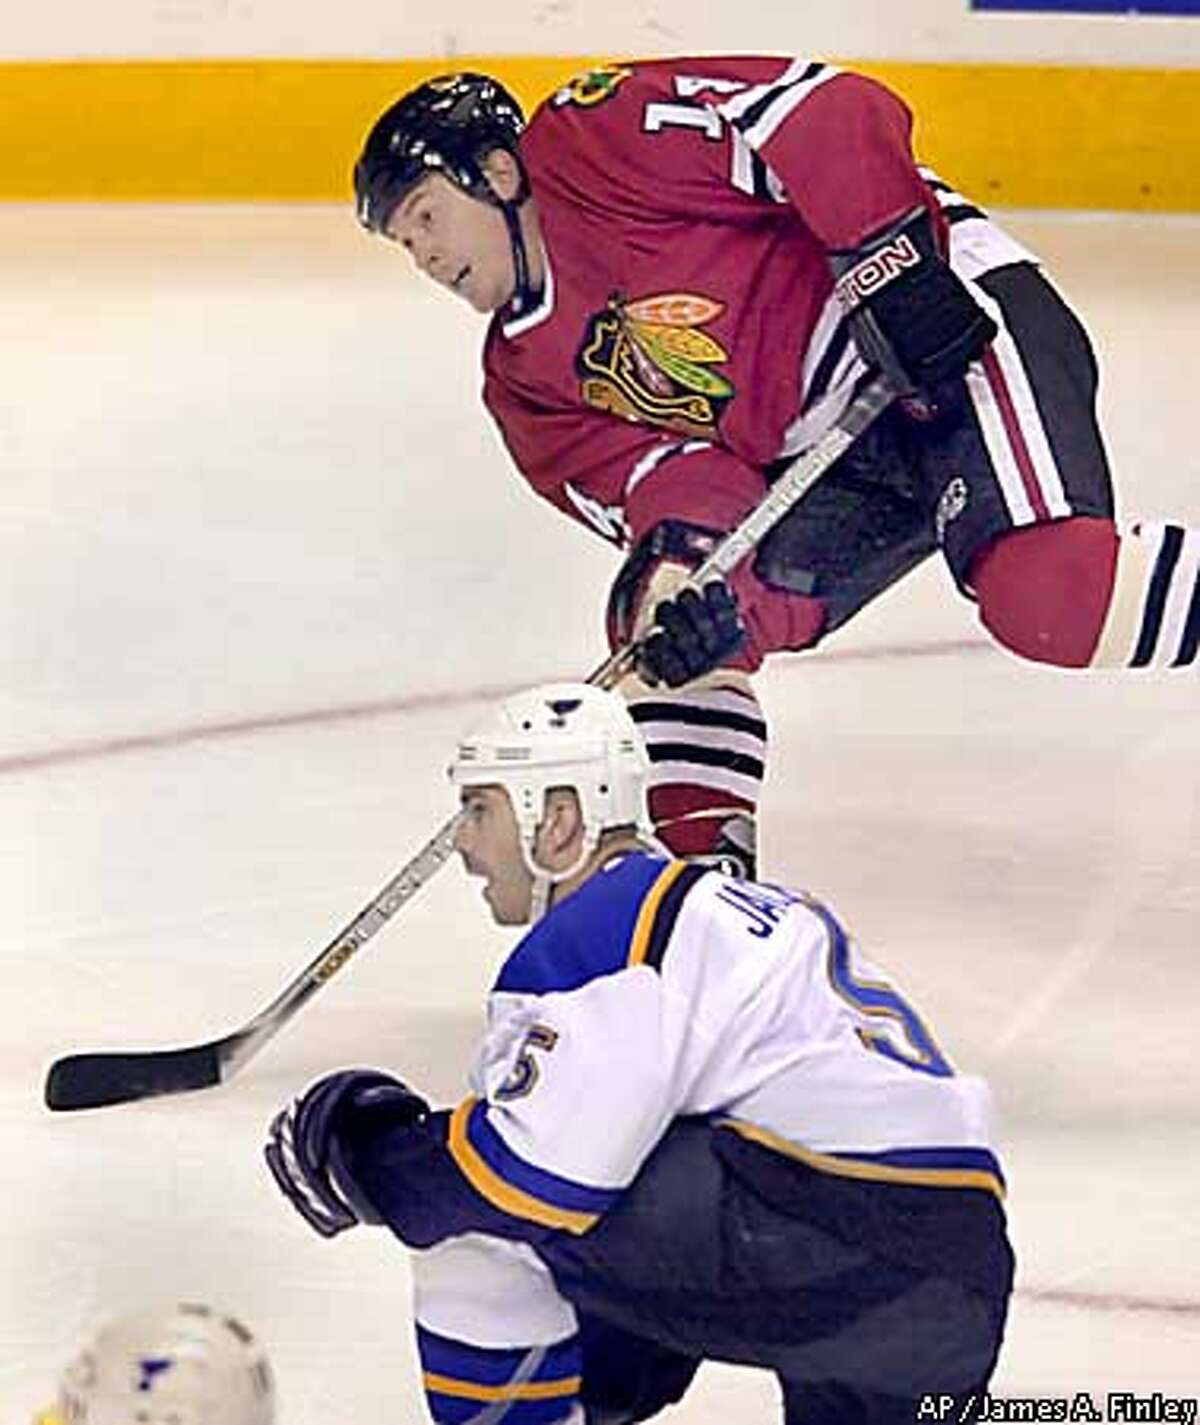 Chicago Blackhawks Theo Fleury (14) takes a shot on goal during the first period against the St. Louis Blues while Barret Jackson (5) looks on in their NHL preseason game at the Savvis Center in St. Louis Friday, Oct. 4, 2002. (AP Photo/James A. Finley)